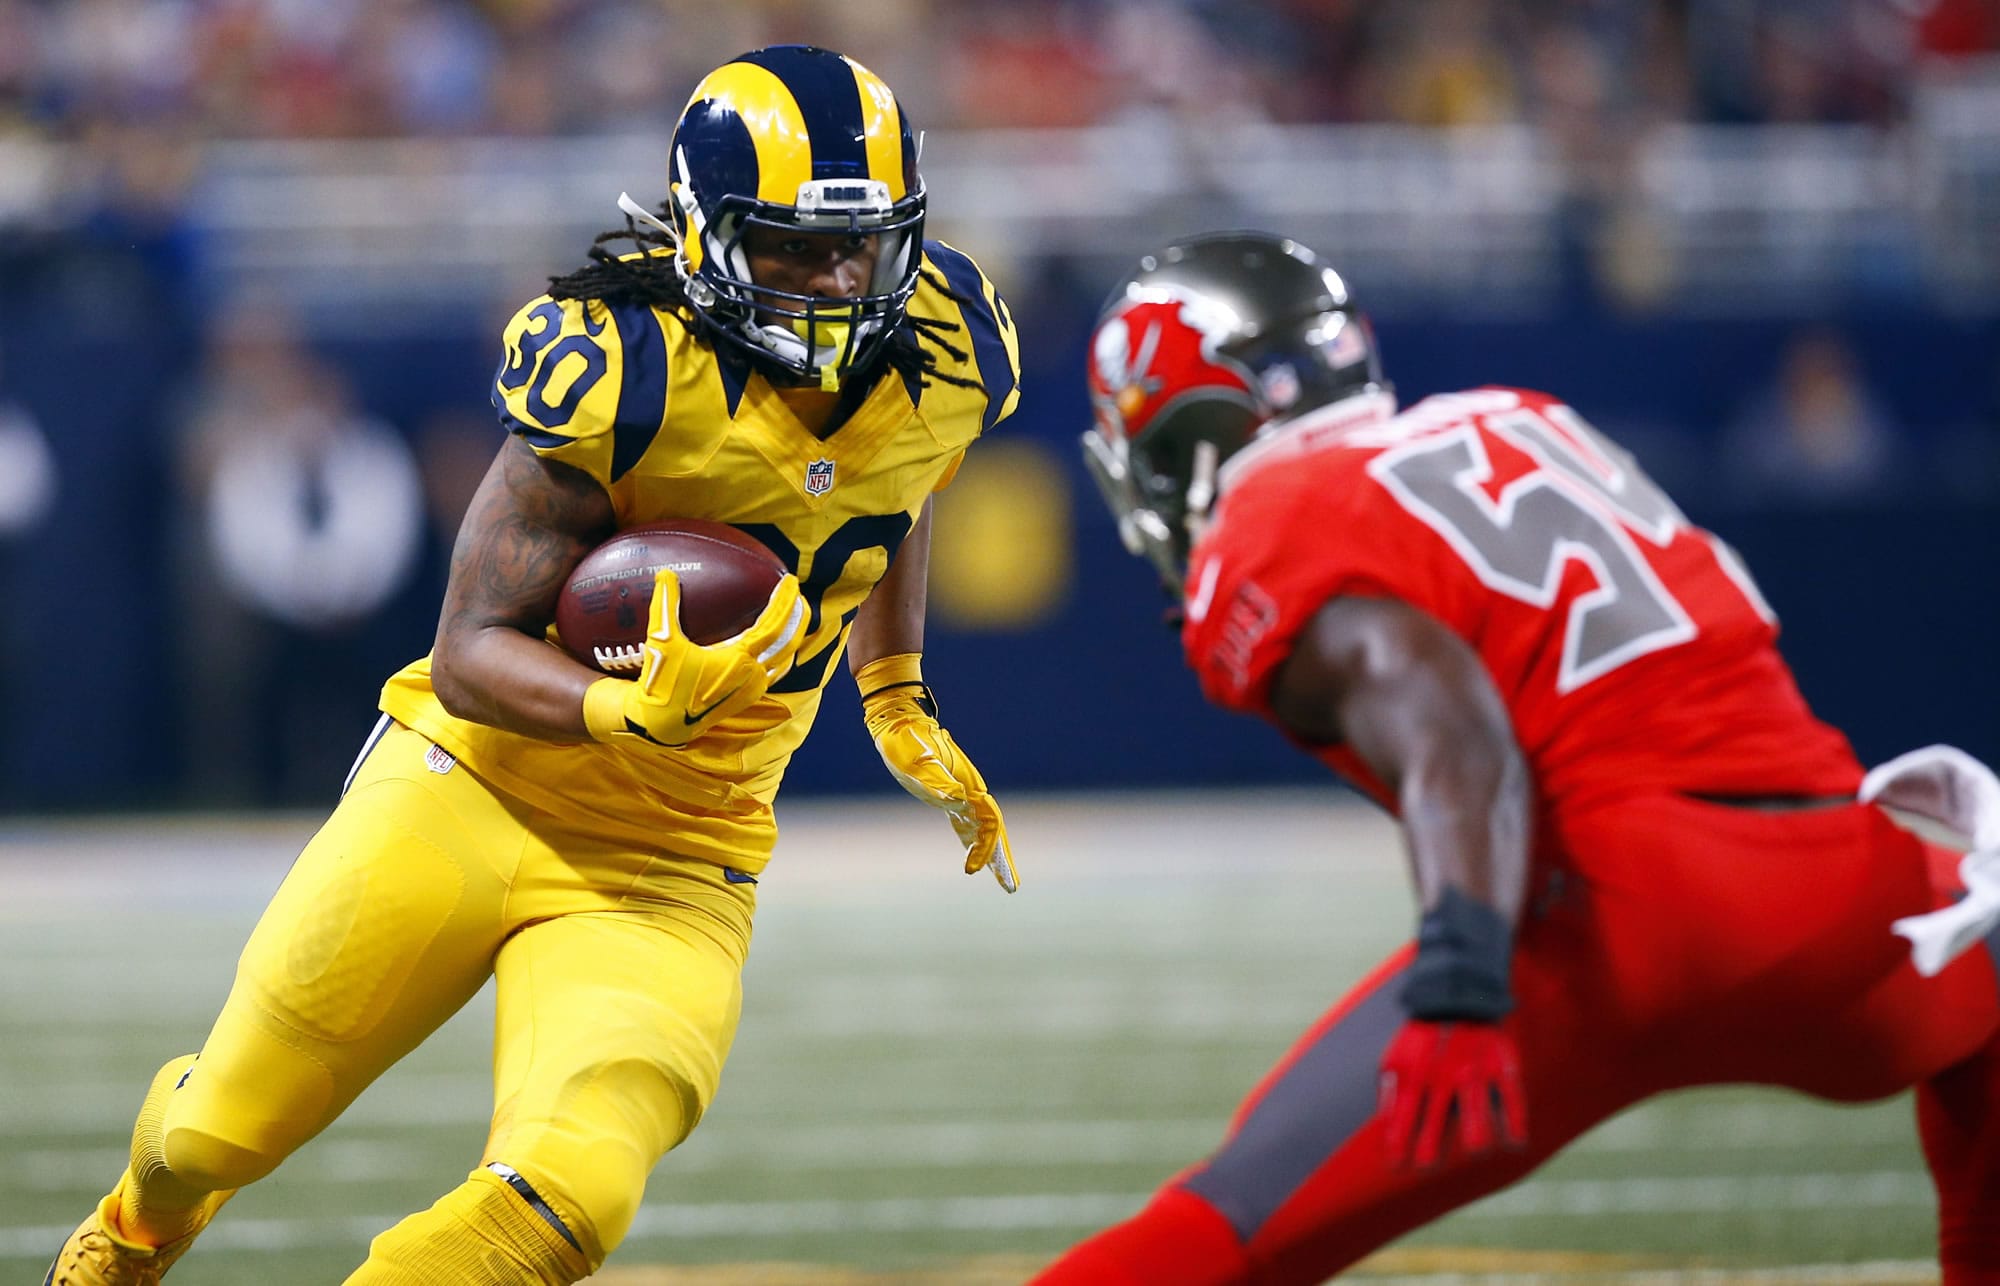 St. Louis Rams running back Todd Gurley, left, carries the ball as Tampa Bay Buccaneers outside linebacker Lavonte David defends during the second quarter of an NFL football game Thursday, Dec. 17, 2015, in St. Louis.